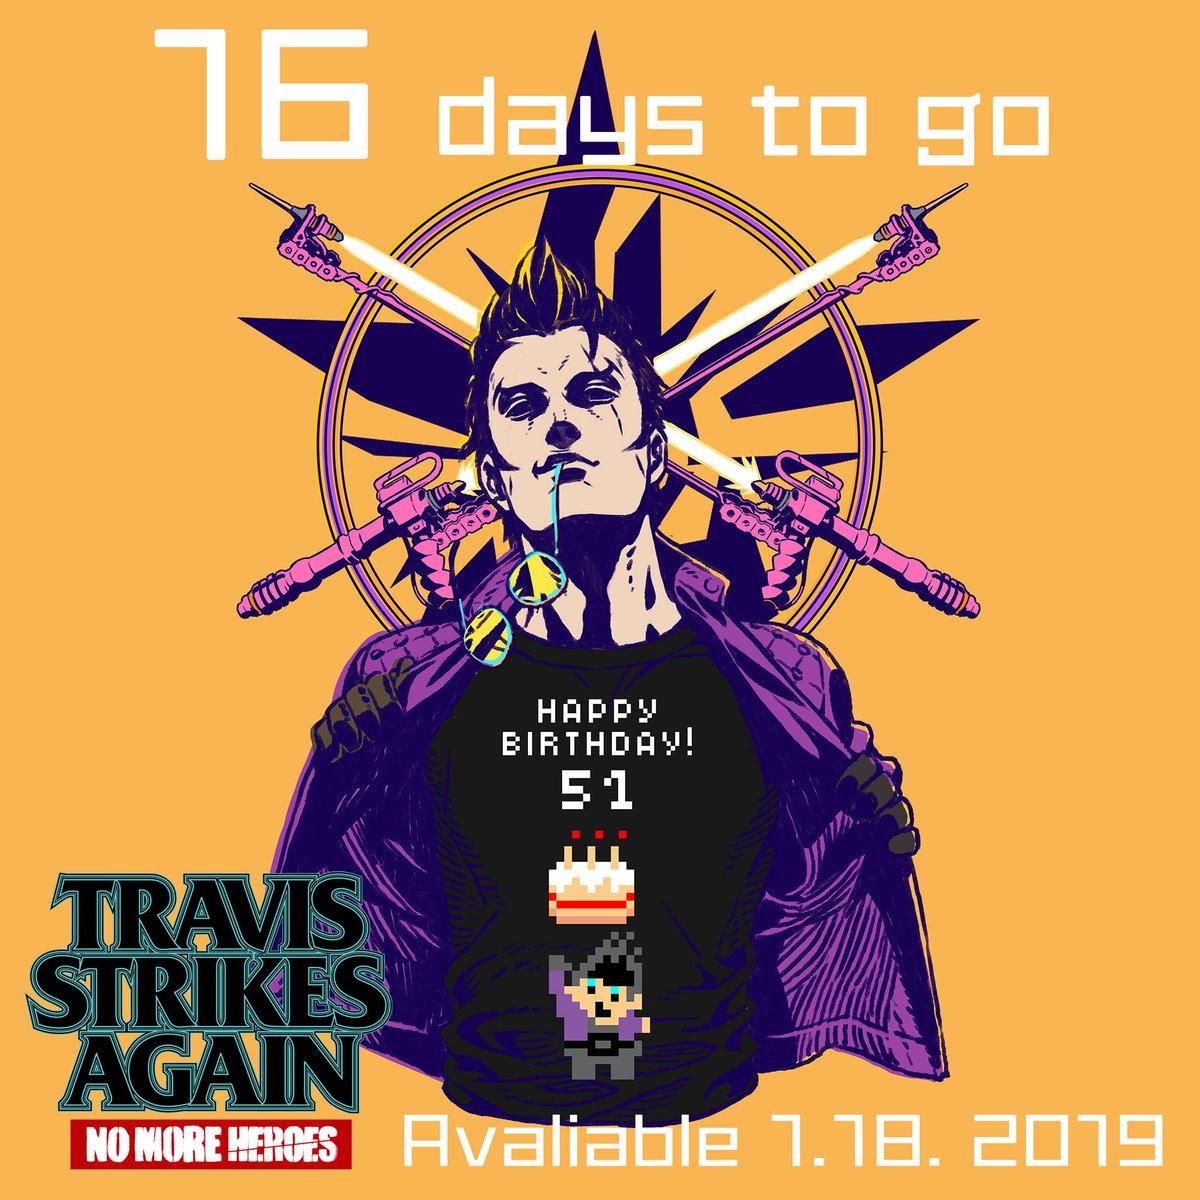 Travis Strikes Again: No More Heroes - new t-shirts for Jan. 